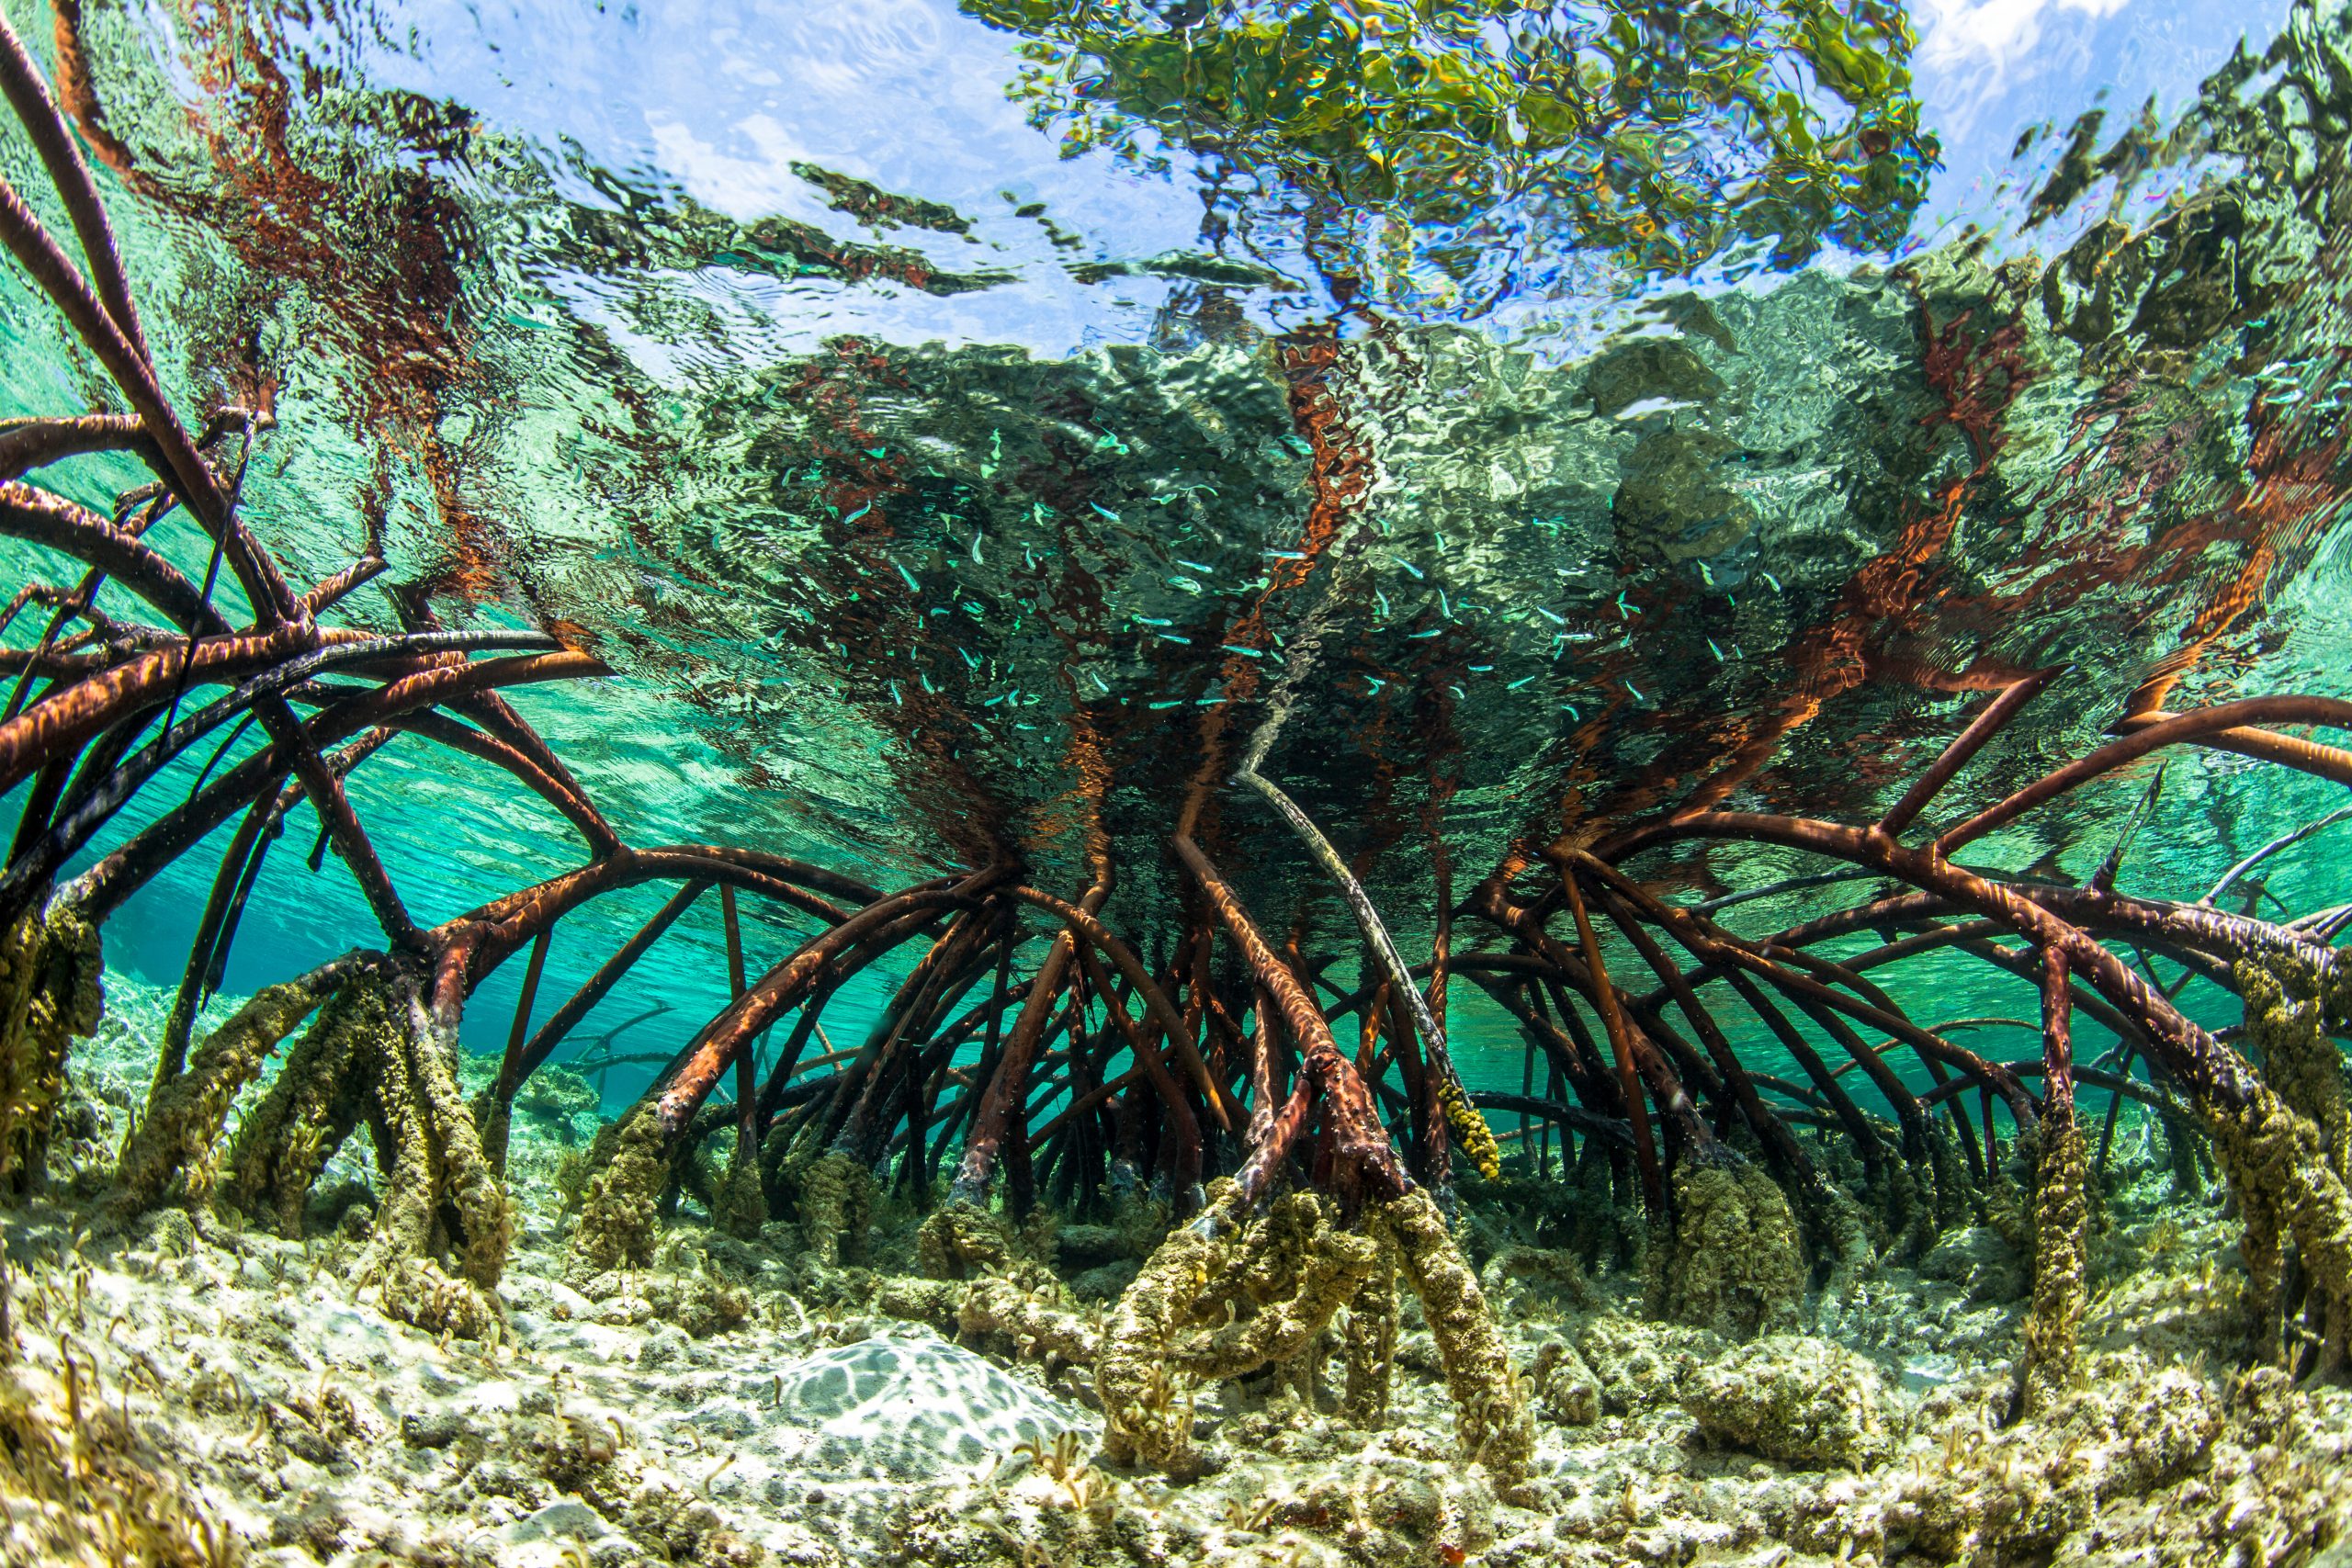 Underwater photograph of a mangrove tree in clear tropical waters with blue sky in backgound near Staniel Cay, Exuma, Bahamas